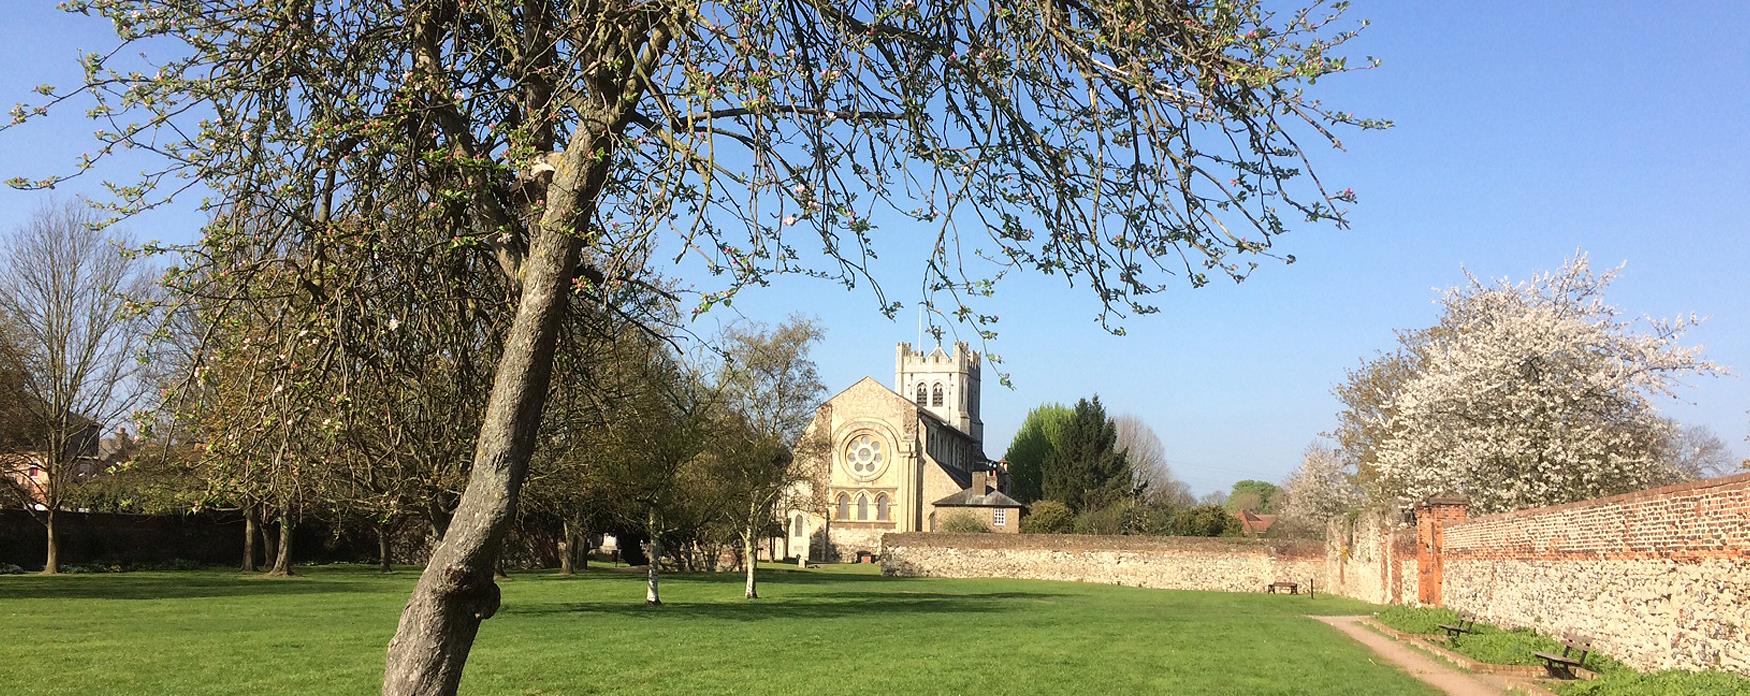 view across the garden to the exterior of Waltham Abbey church